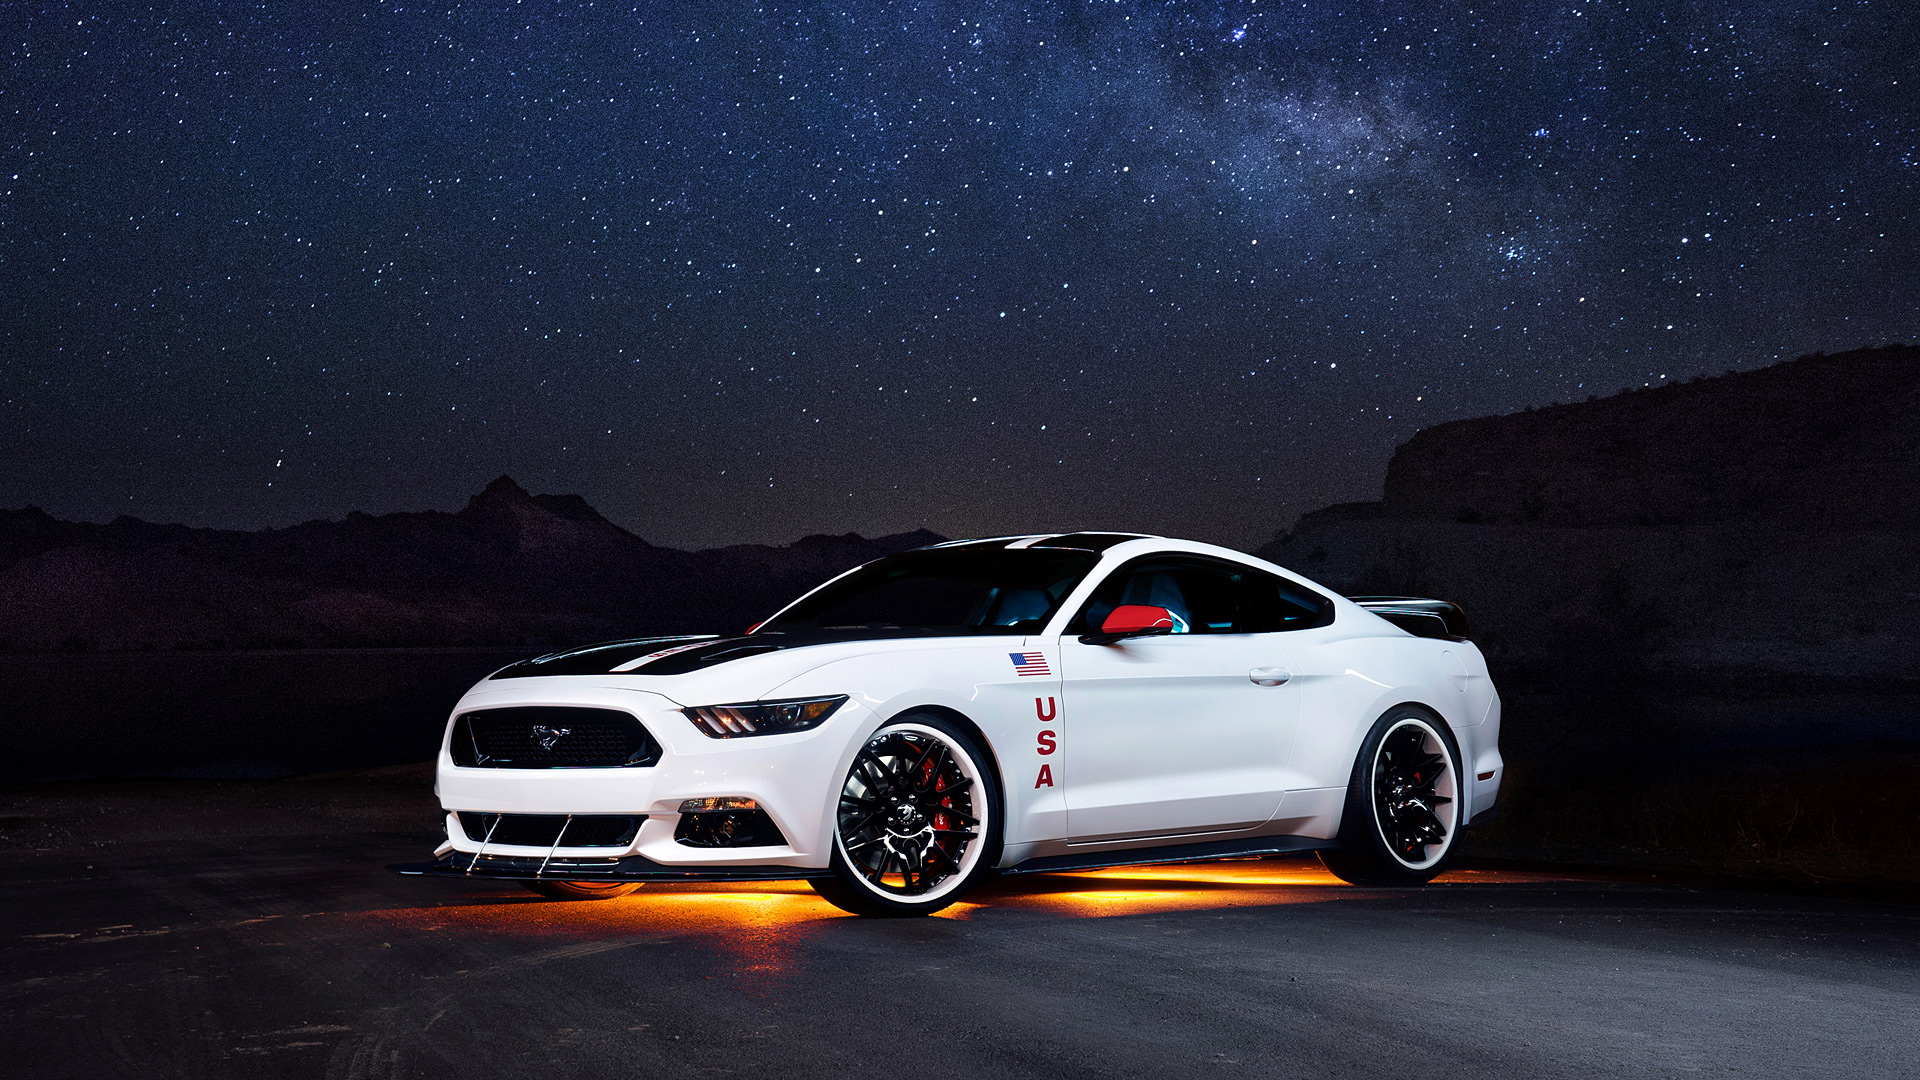  2015 Ford Mustang GT Apollo Edition Wallpaper.